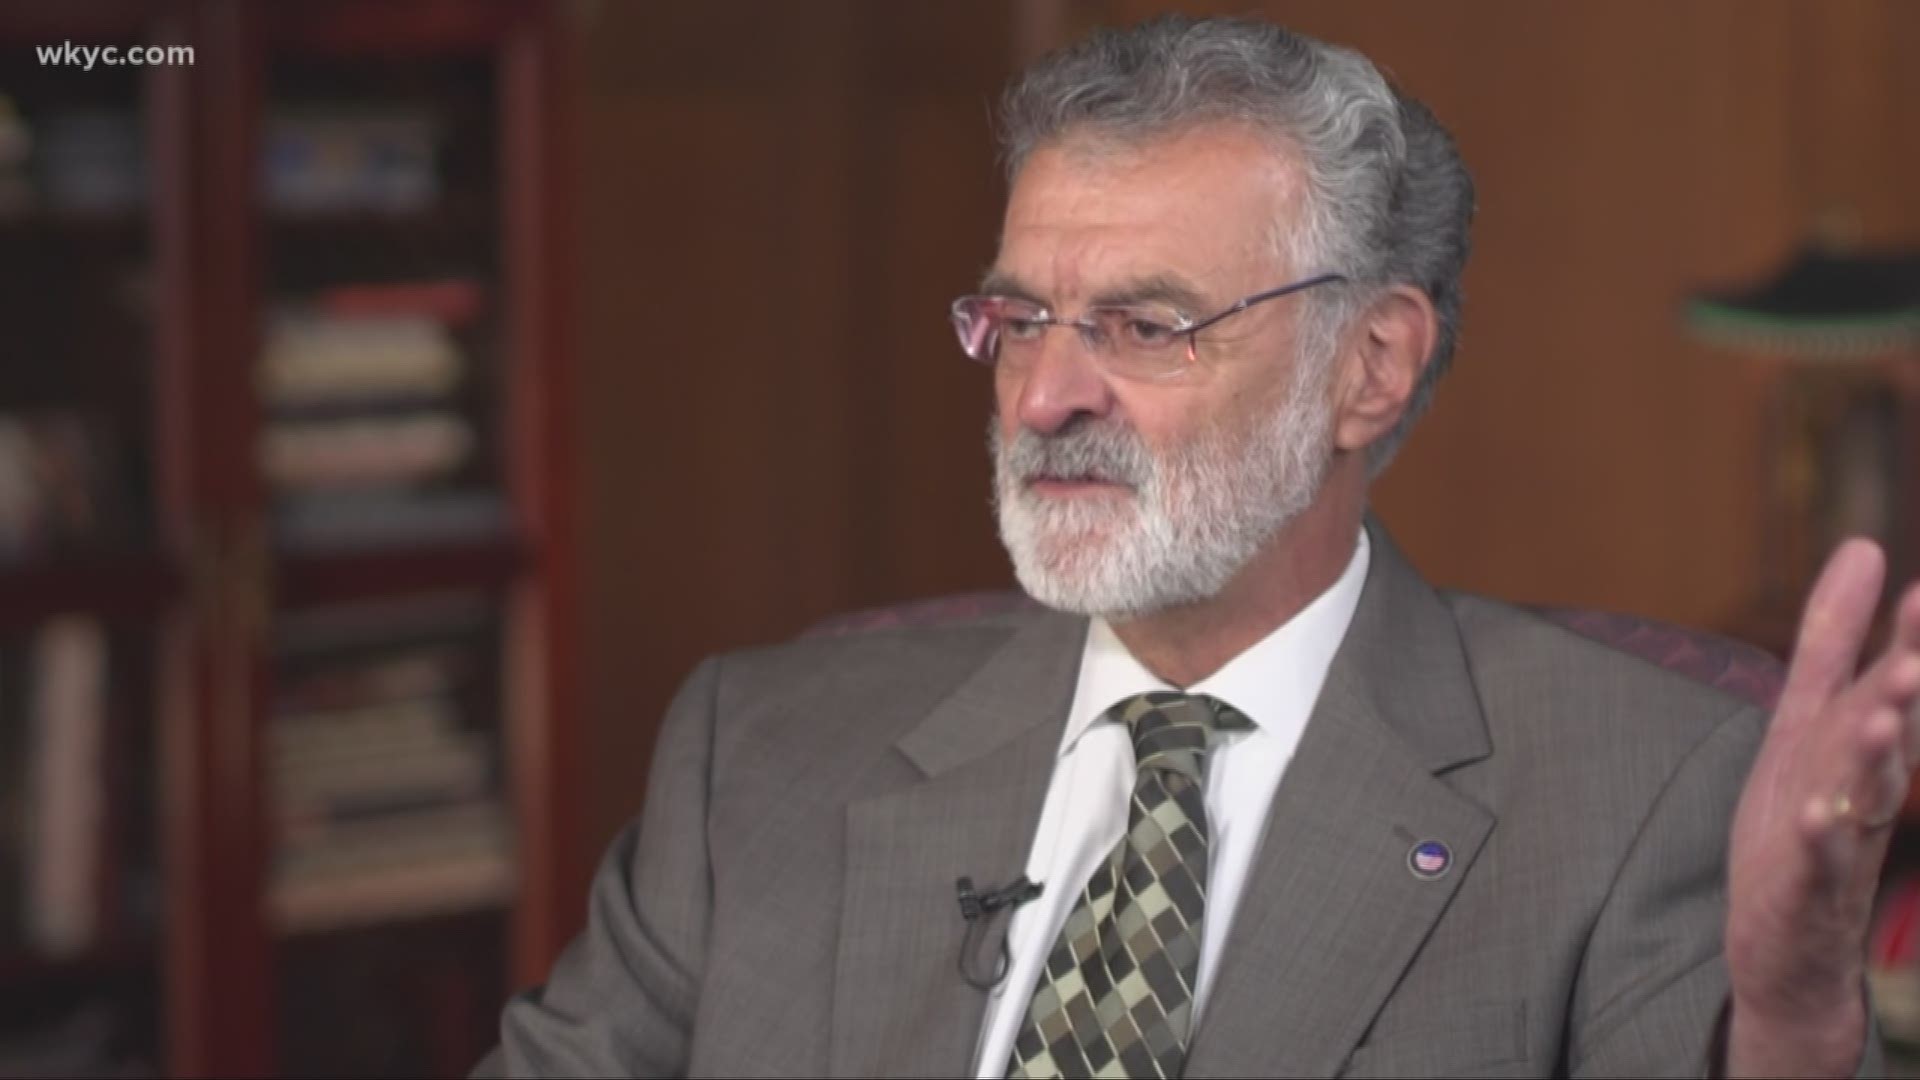 Jim Donovan speaks with Mayor Frank Jackson on life in Cleveland after 2016